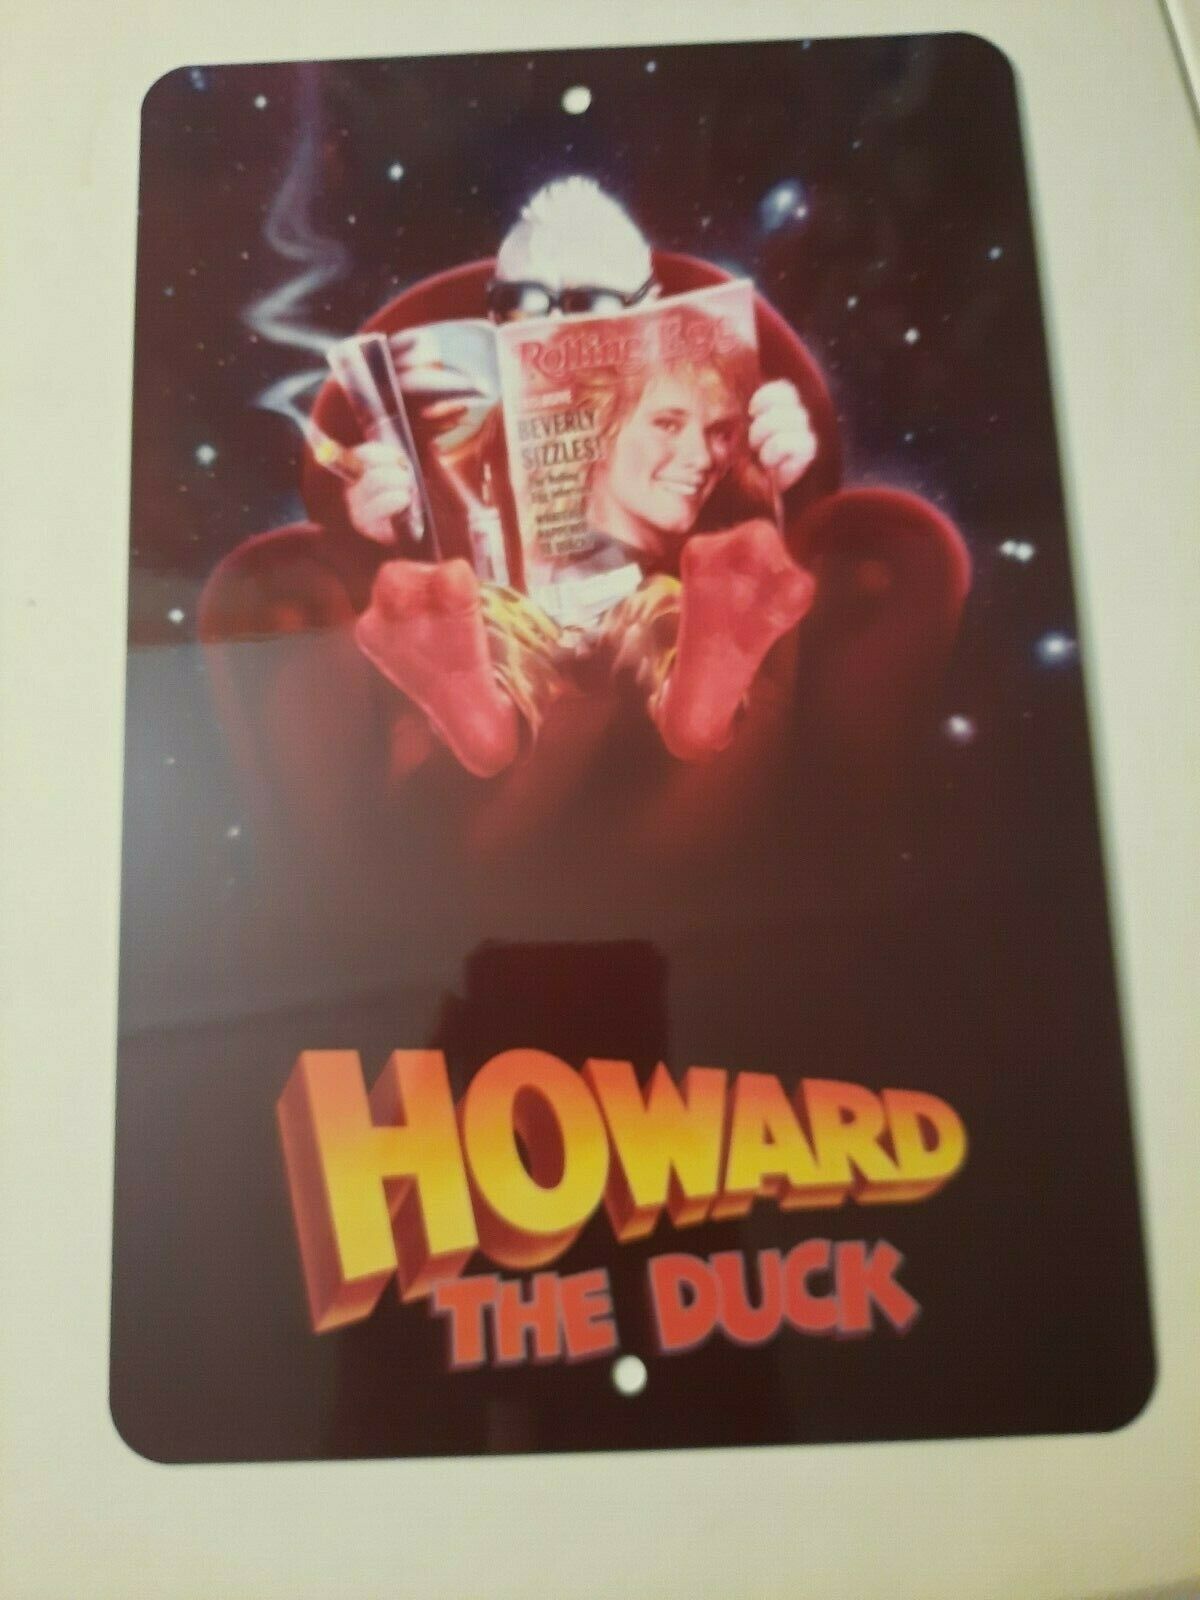 Howard the Duck Retro 80s Comedy Movie Poster 8x12 Metal Wall Sign